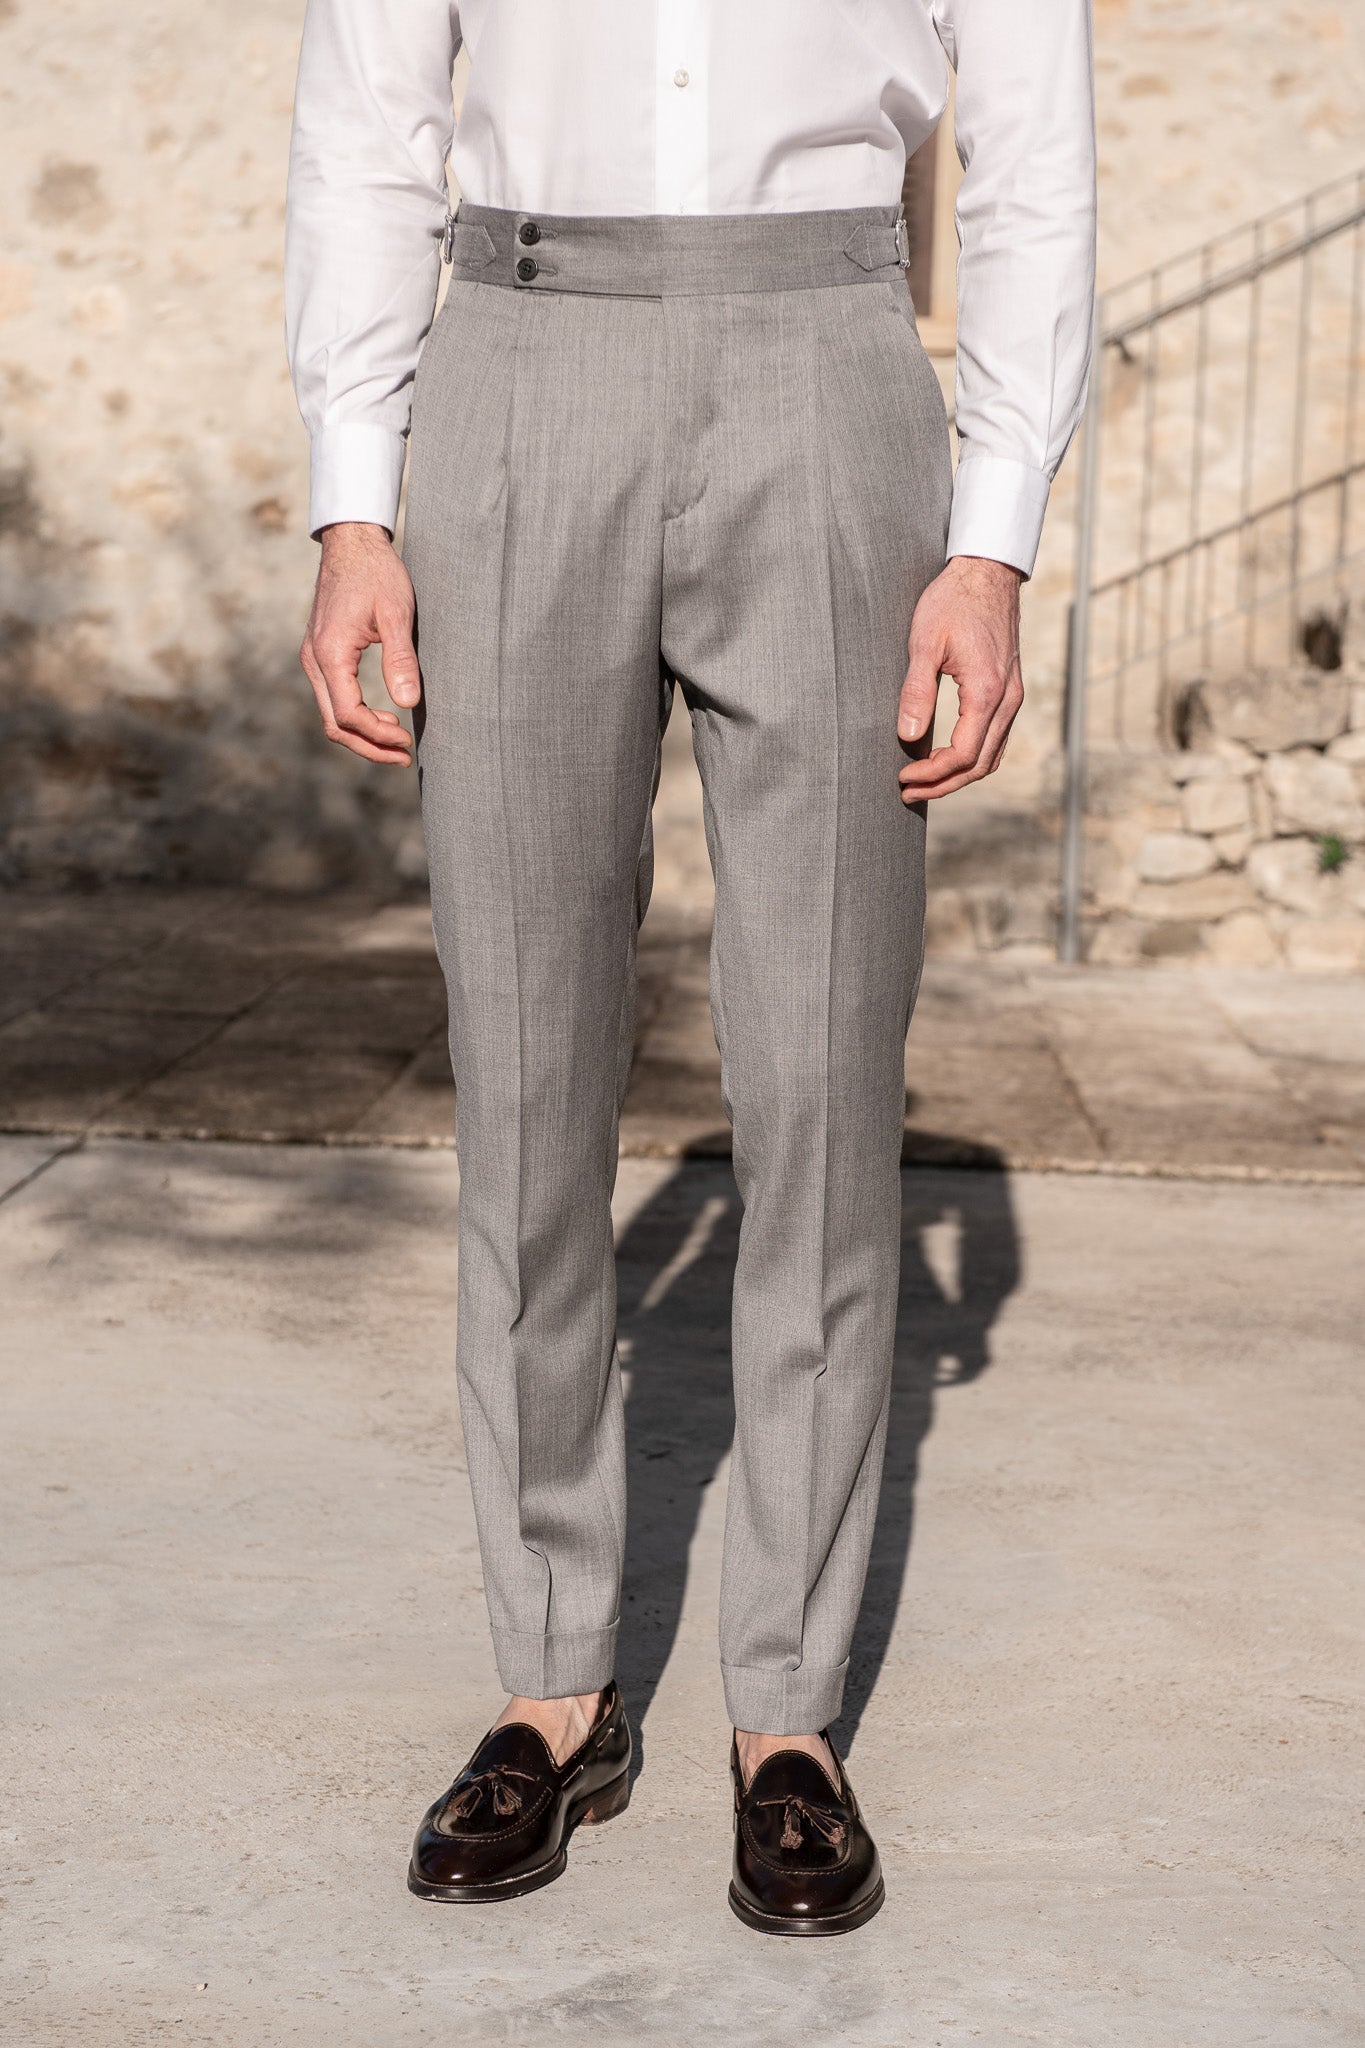 Grey Trousers "Soragna Capsule Collection" - Made in Italy